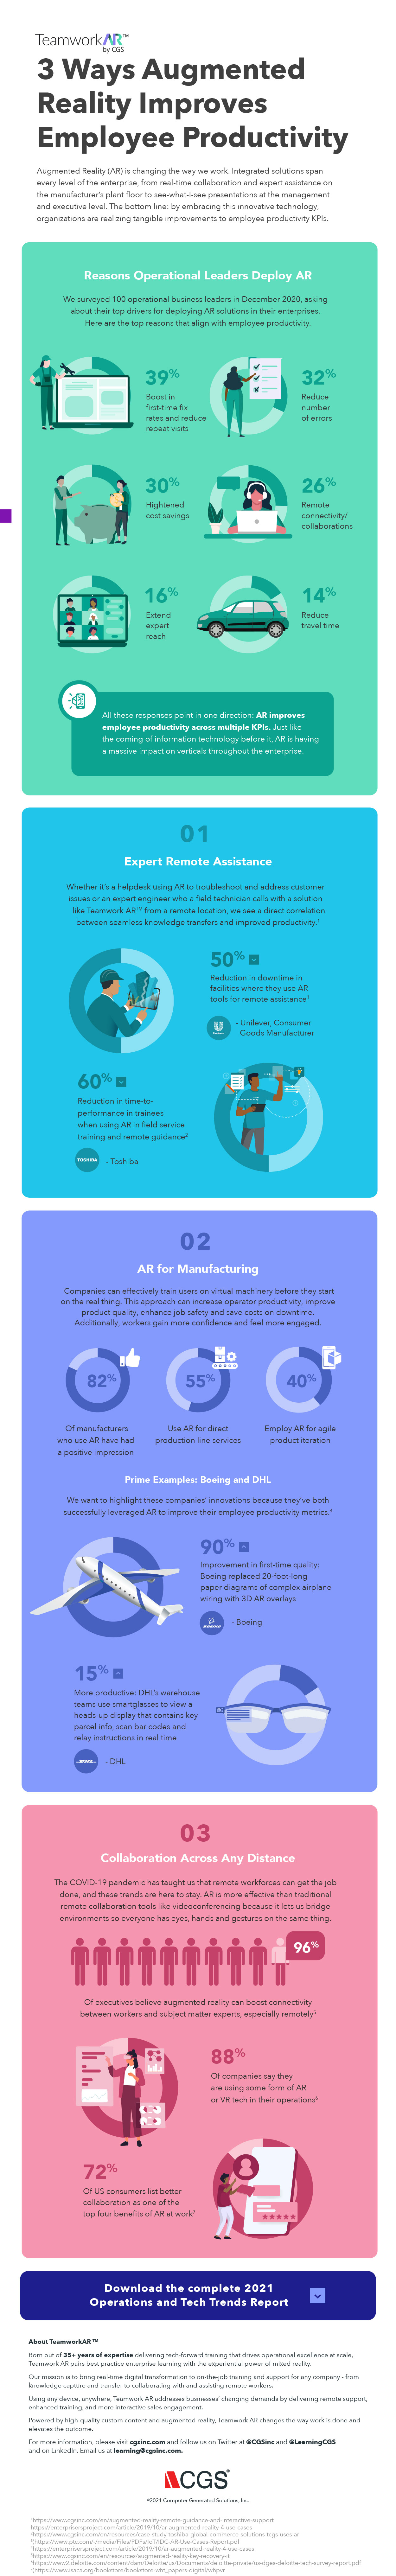 3 Ways Augmented Reality improves employee productivity infographic